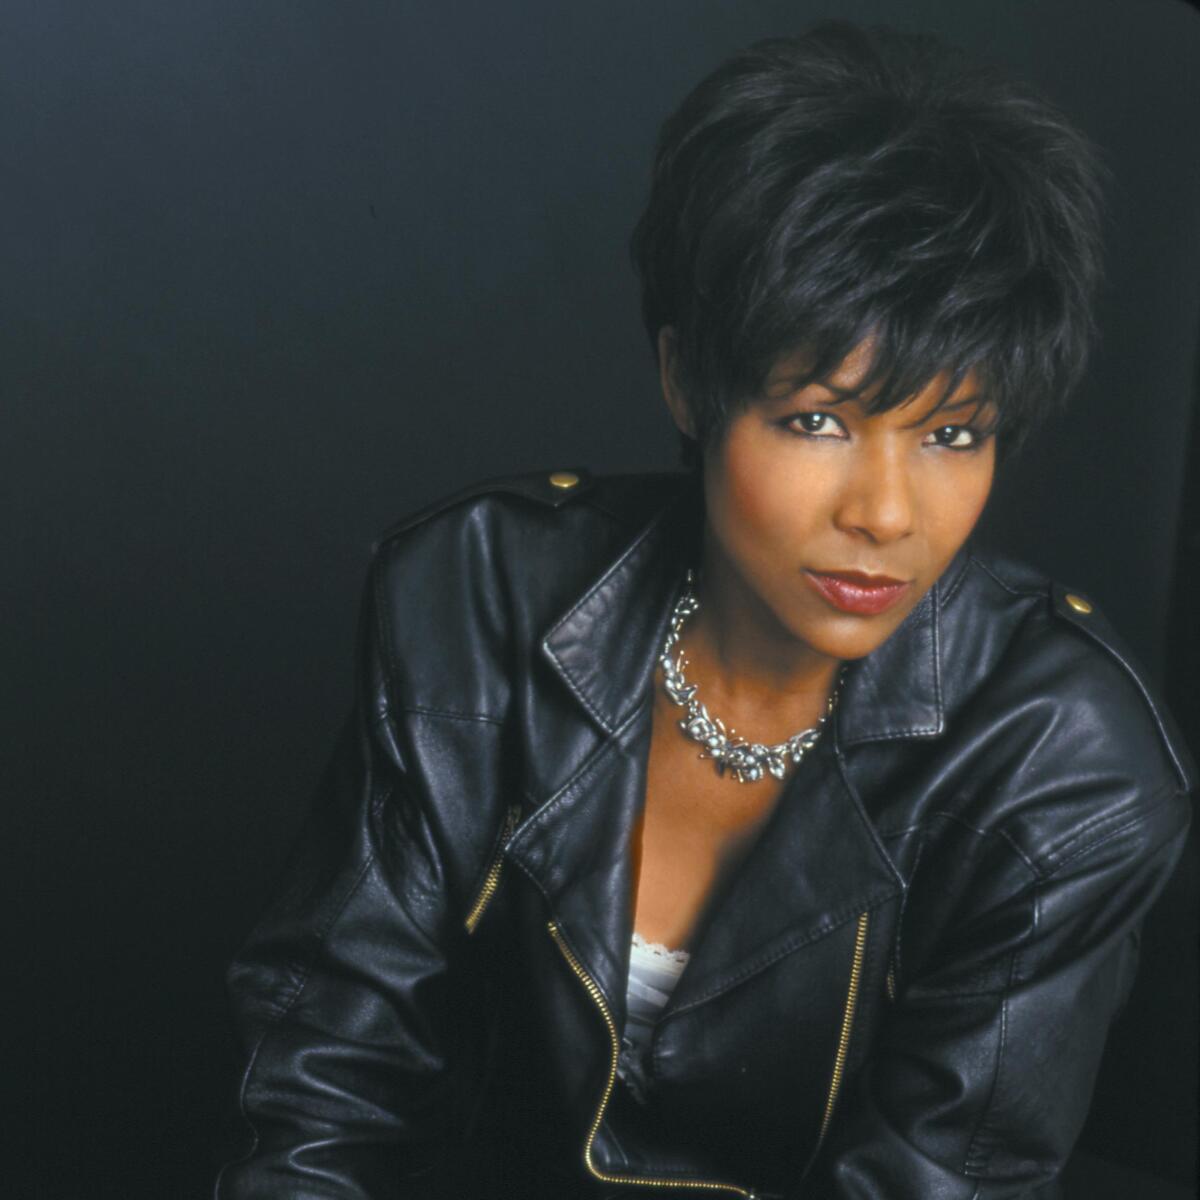 A woman in a black leather jacket sits for a portrait.